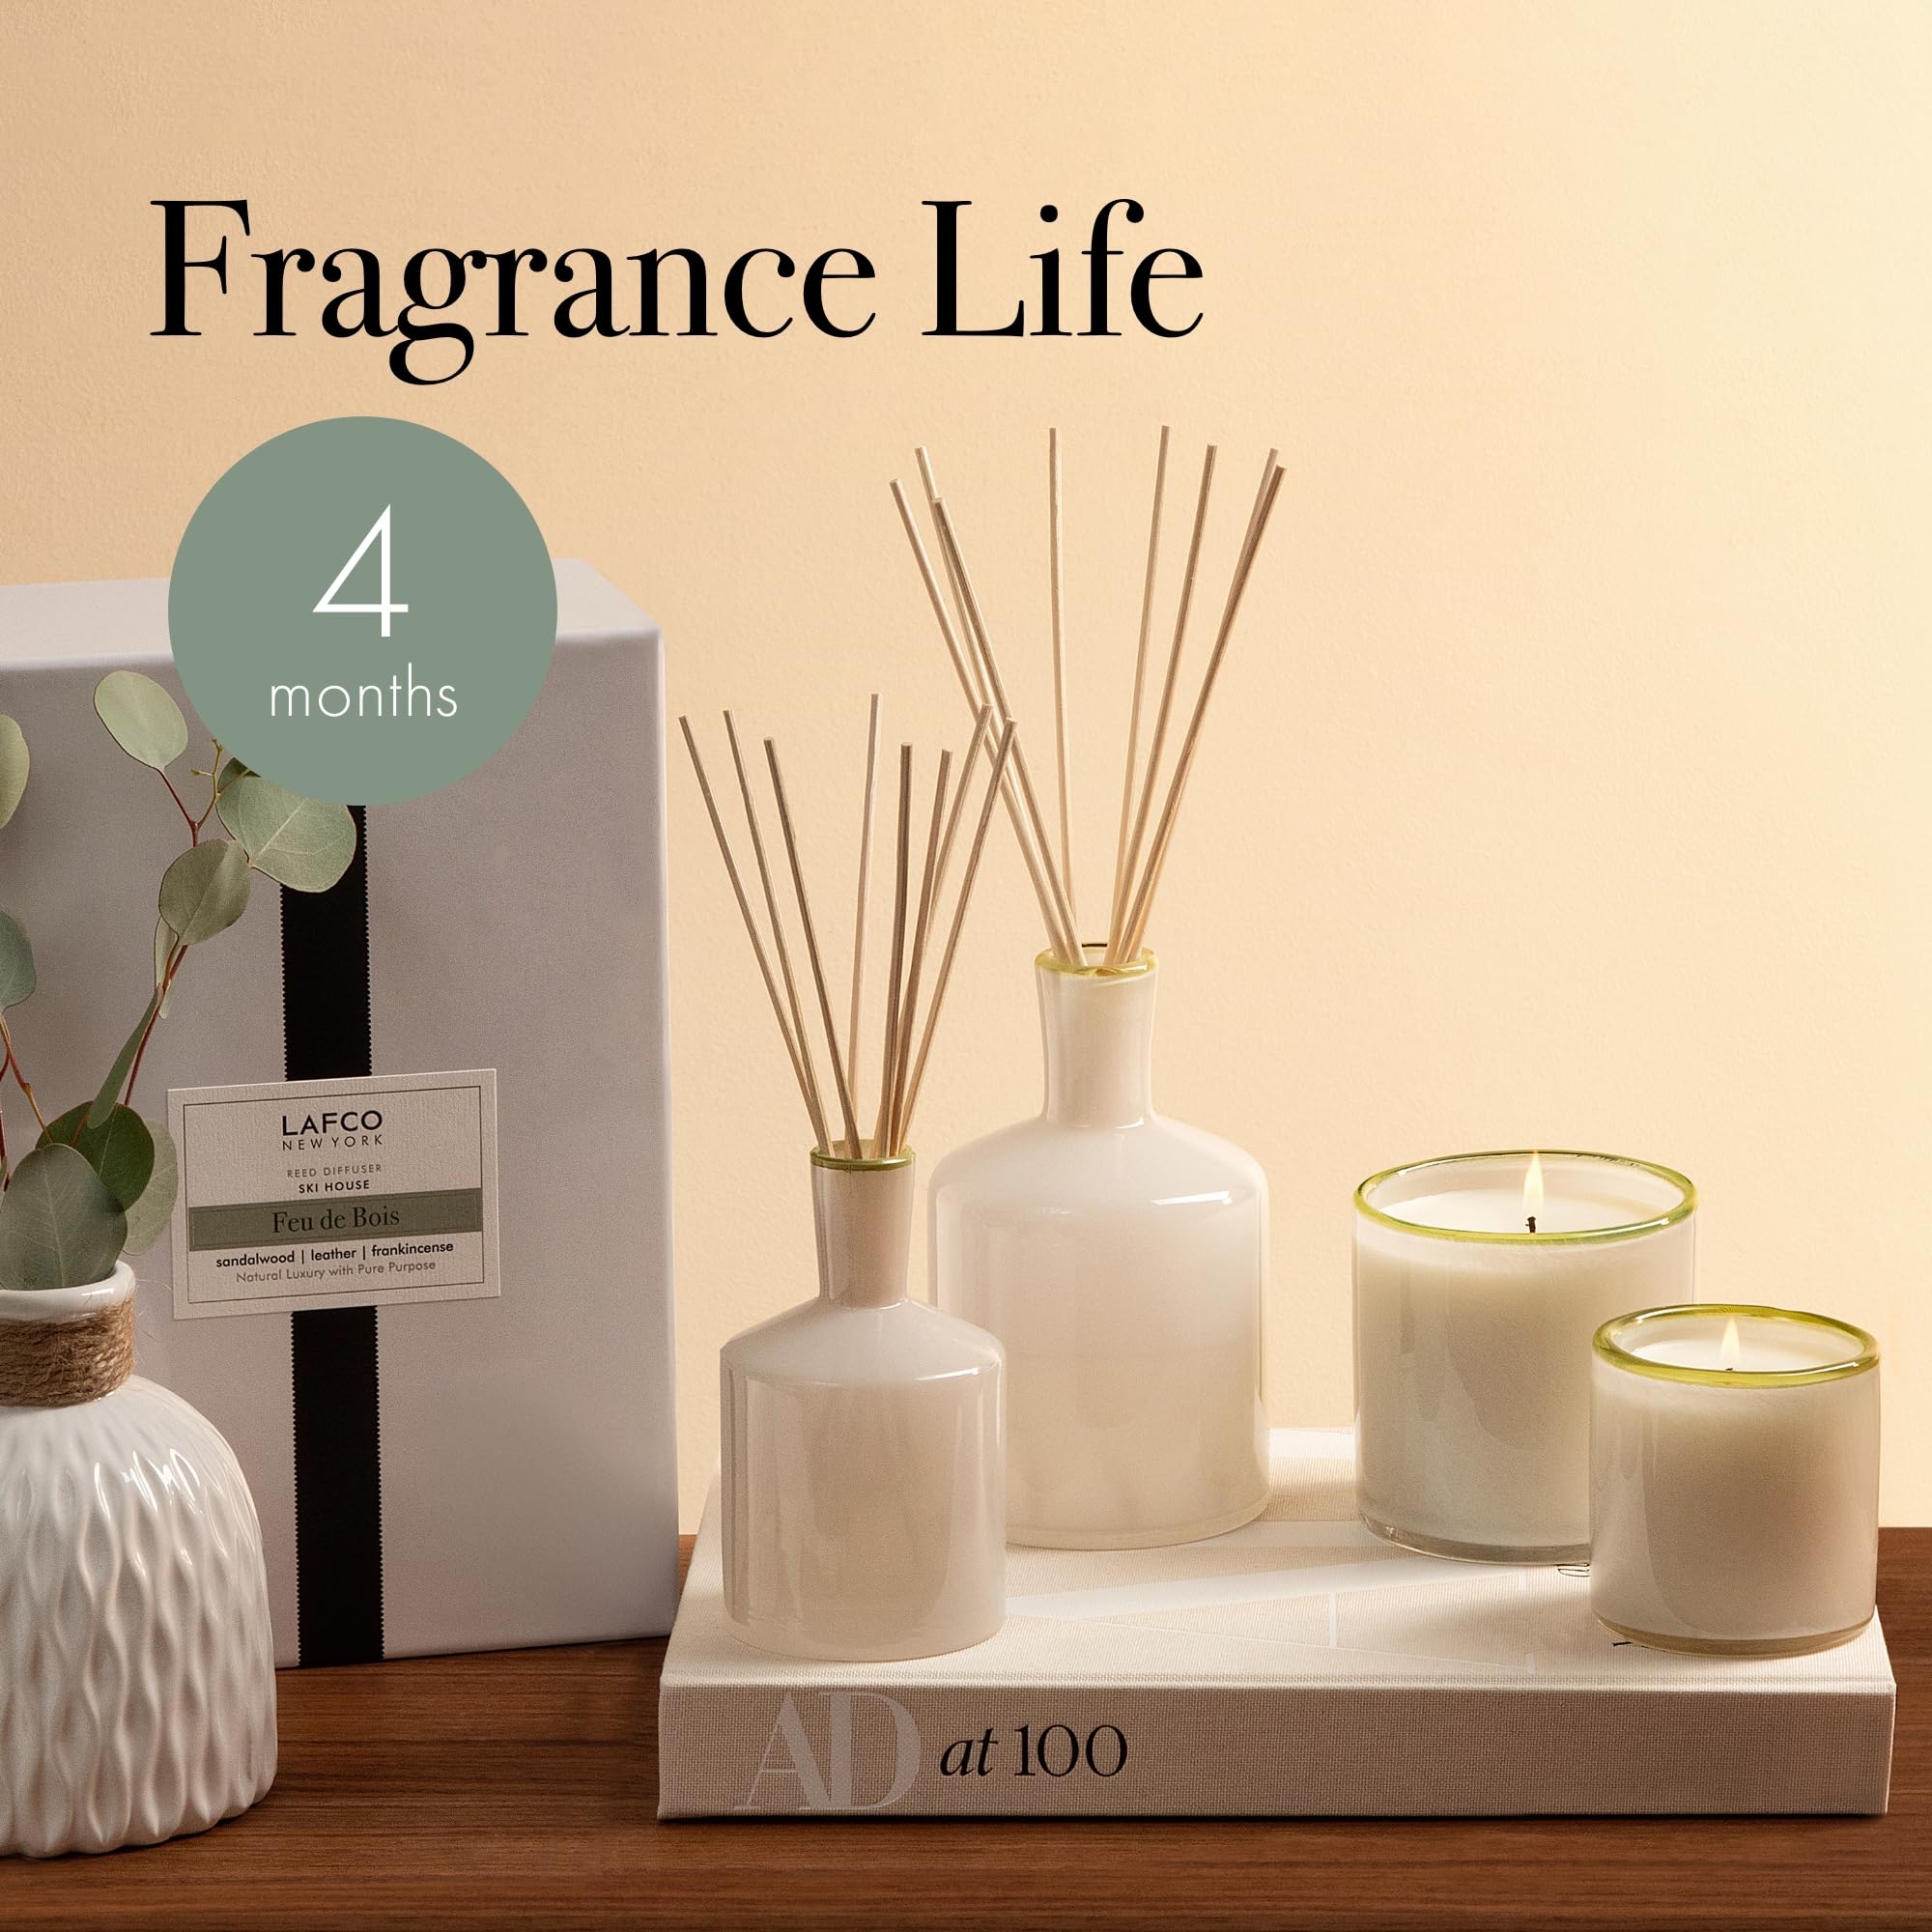 LAFCO New York Reed Diffuser Refill, Feu de Bois - 8.4 oz - Up to 4-Month Fragrance Life - Includes Natural Wood Reeds - Free of Dyes & Propellants - Made in the USA